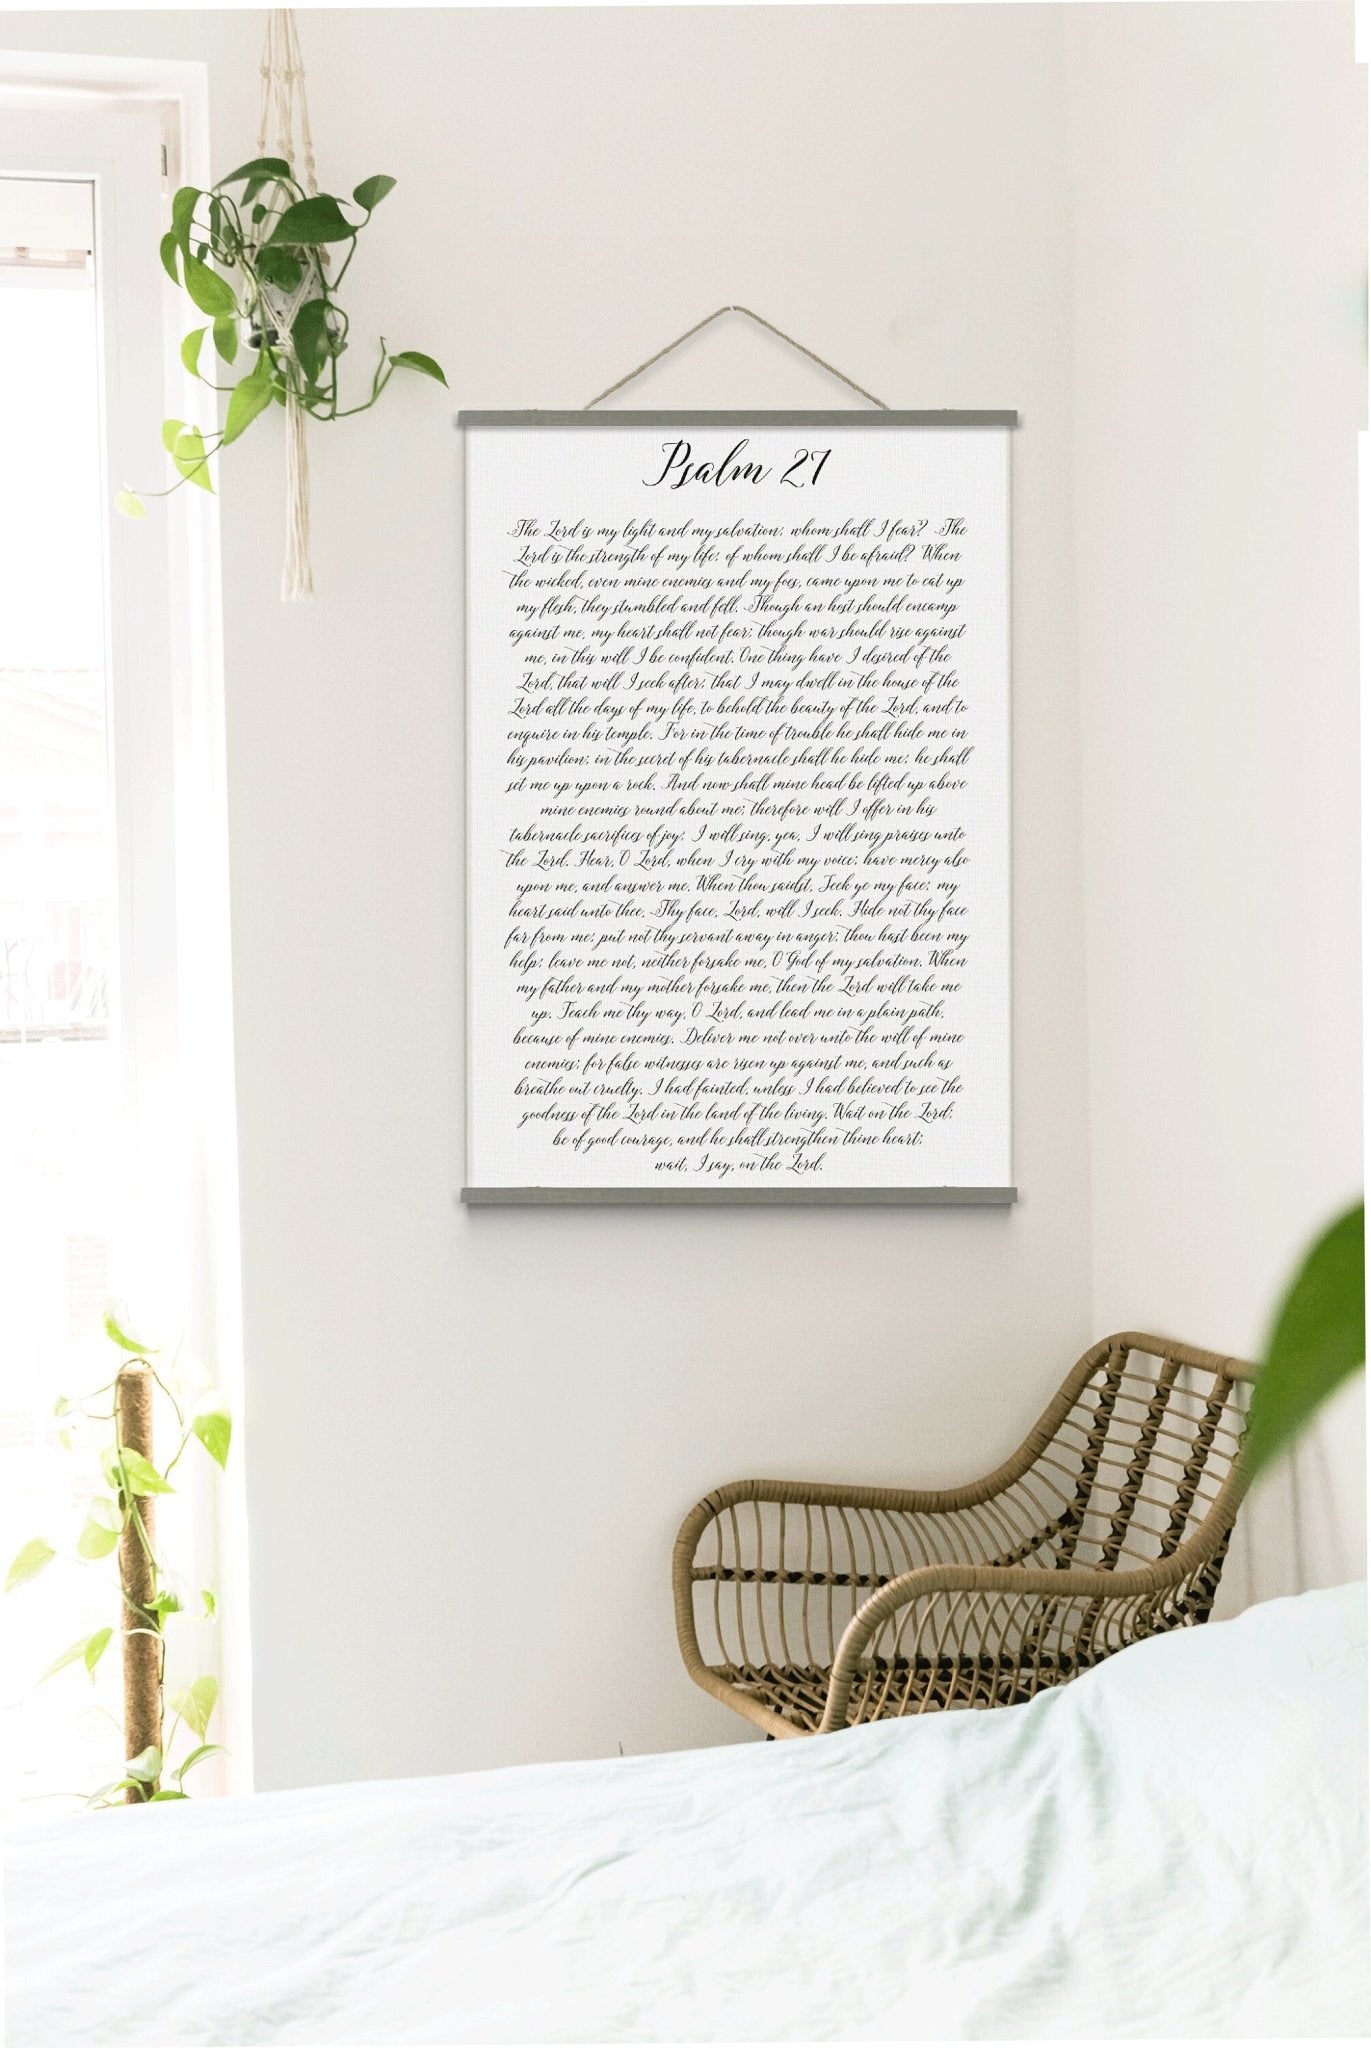 Scripture HANGING CANVAS Psalm 27 | Christian Wall Decor | Bible Verse Hanging Canvas | Psalm 27 Scripture Wall Art Wood Hanging Canvas - Forever Written